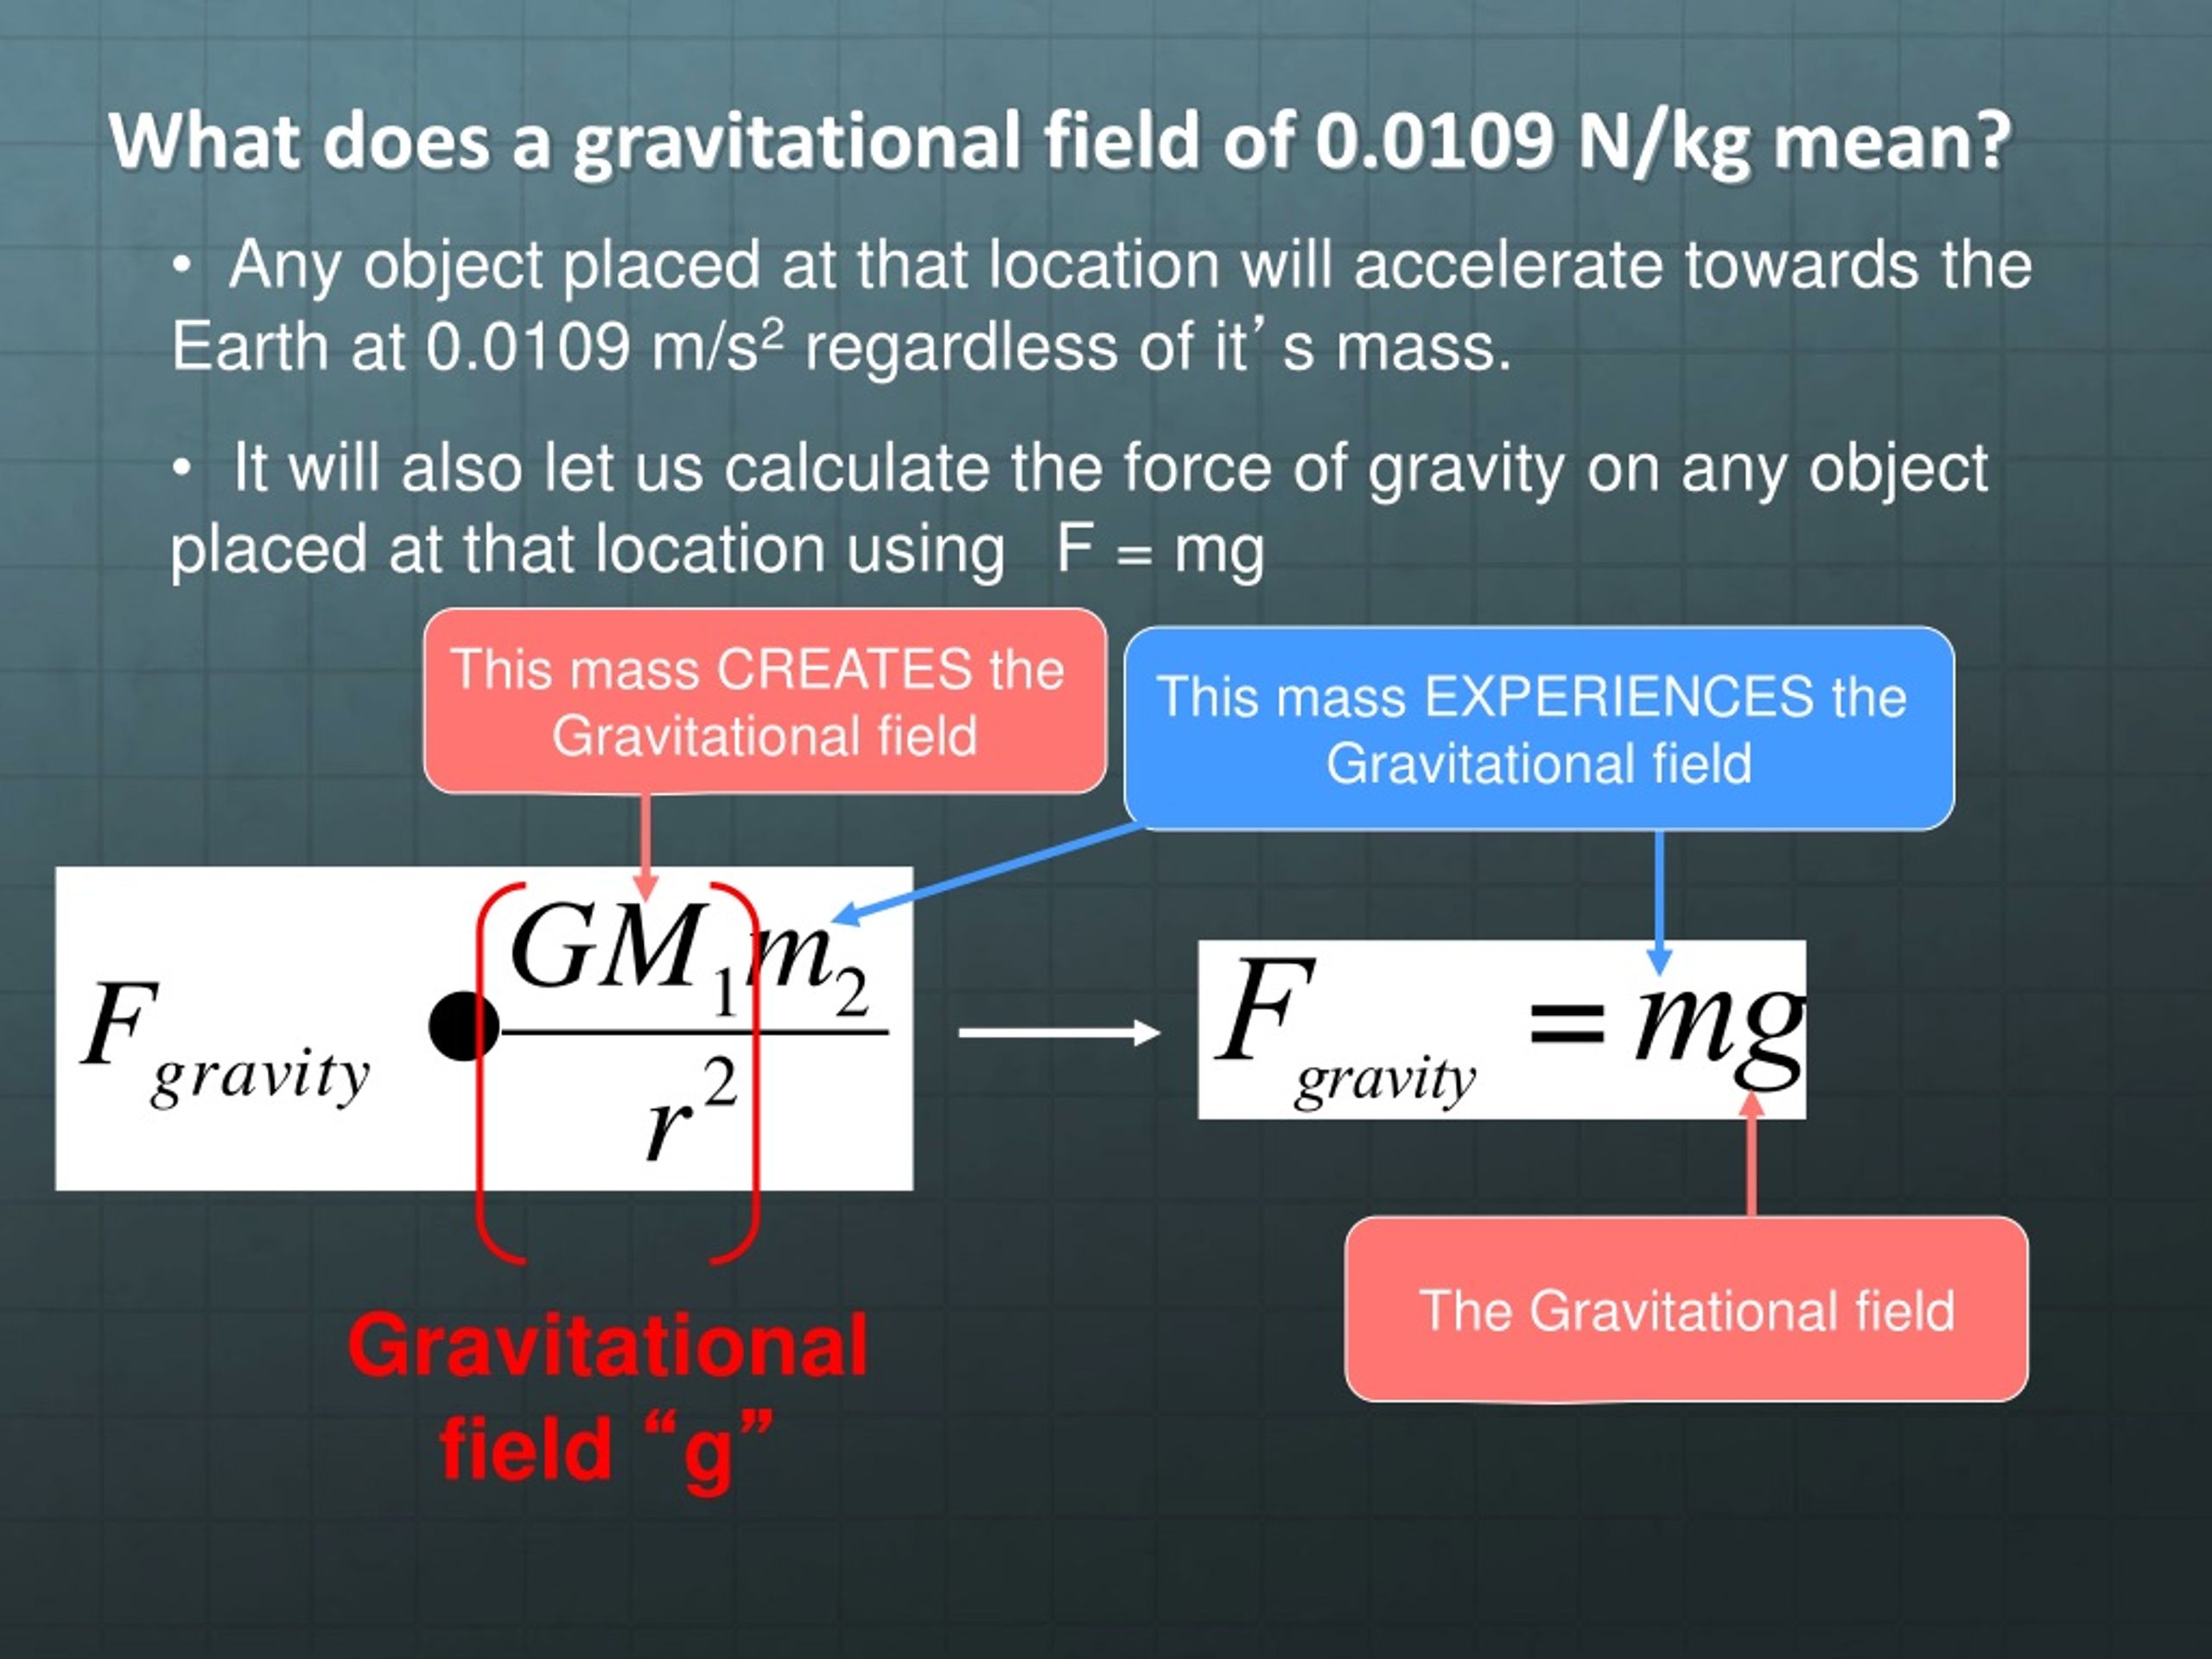 Ppt Gravitational Field And Gravitational Force Powerpoint Presentation Id358205 2892